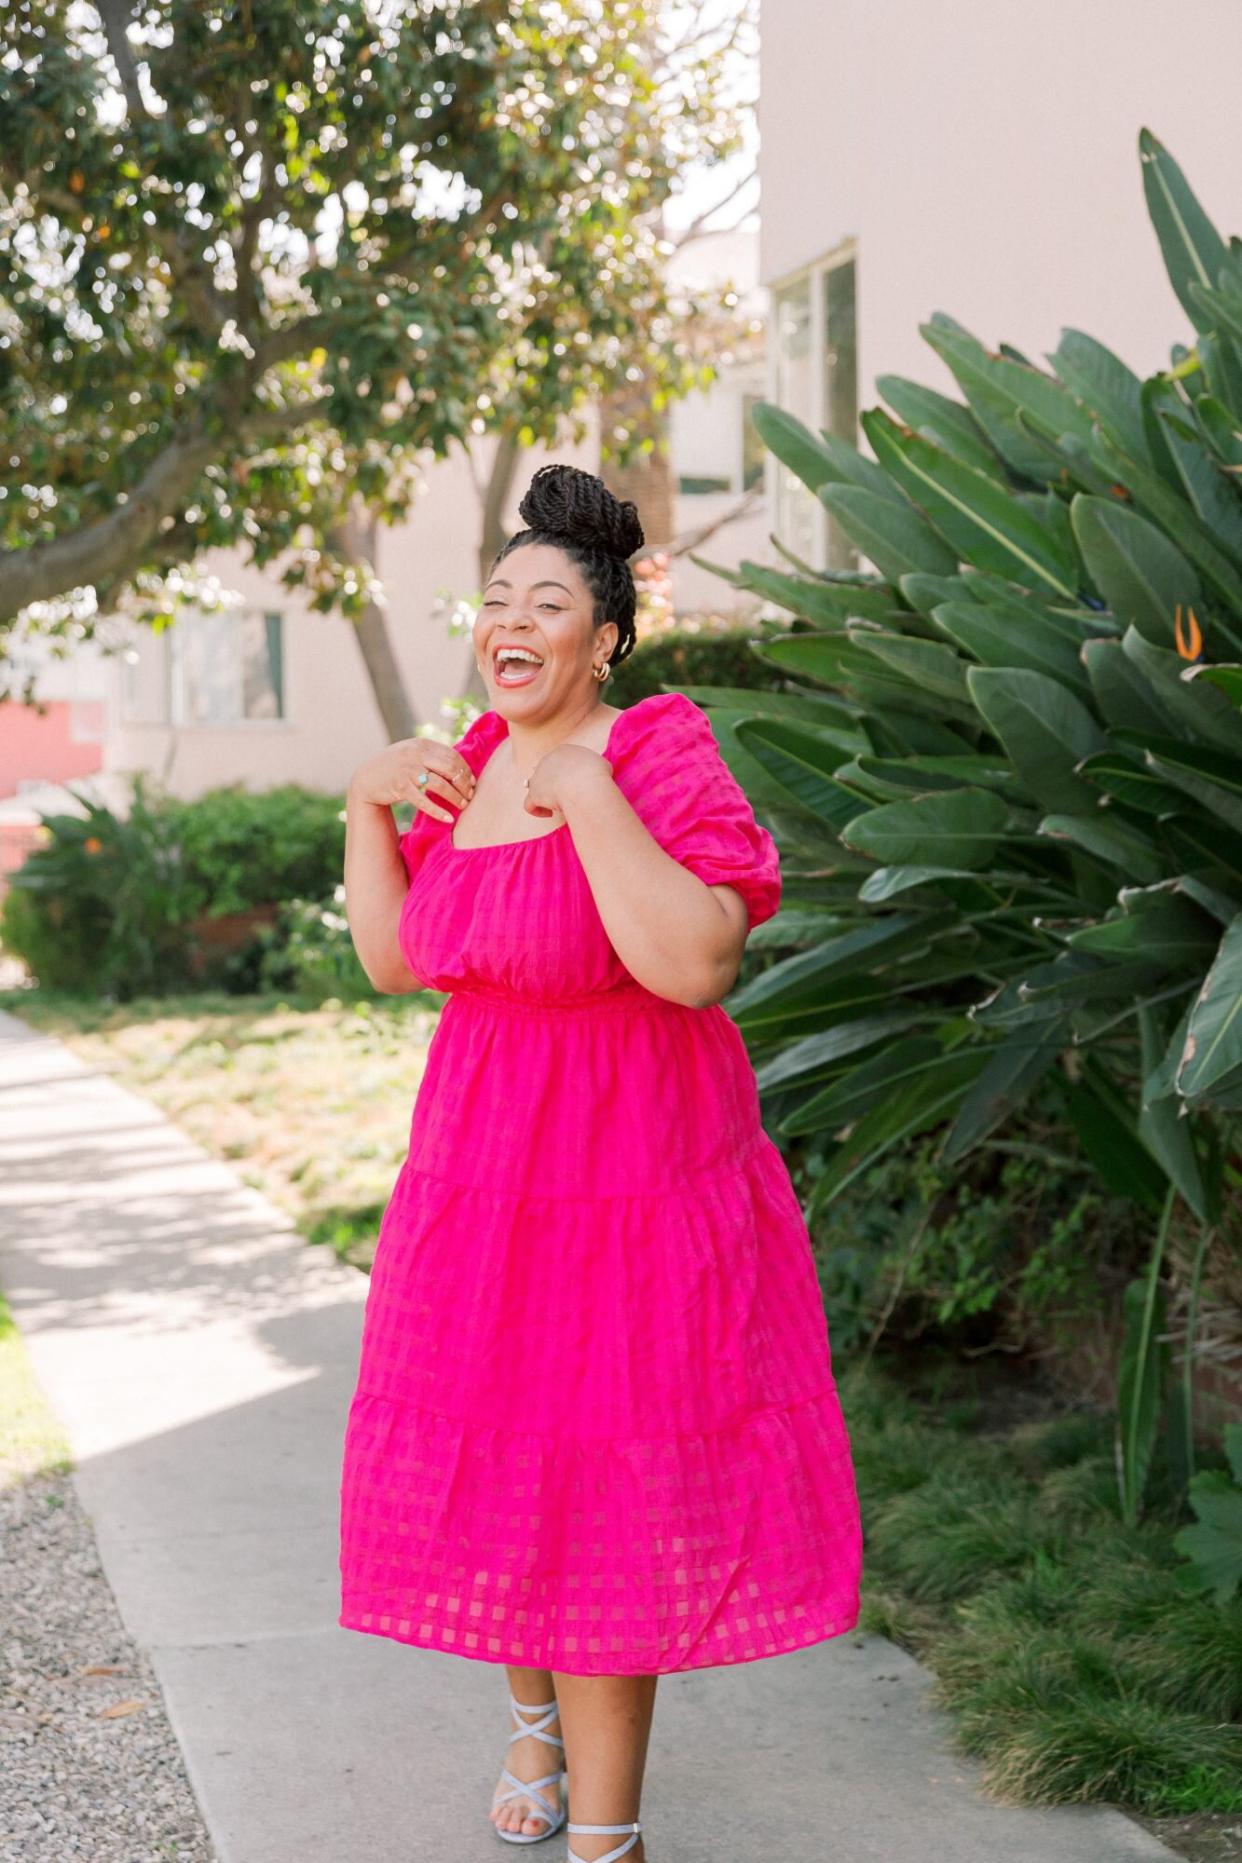 Plus Size Influencers Share Their Personal Style Journeys